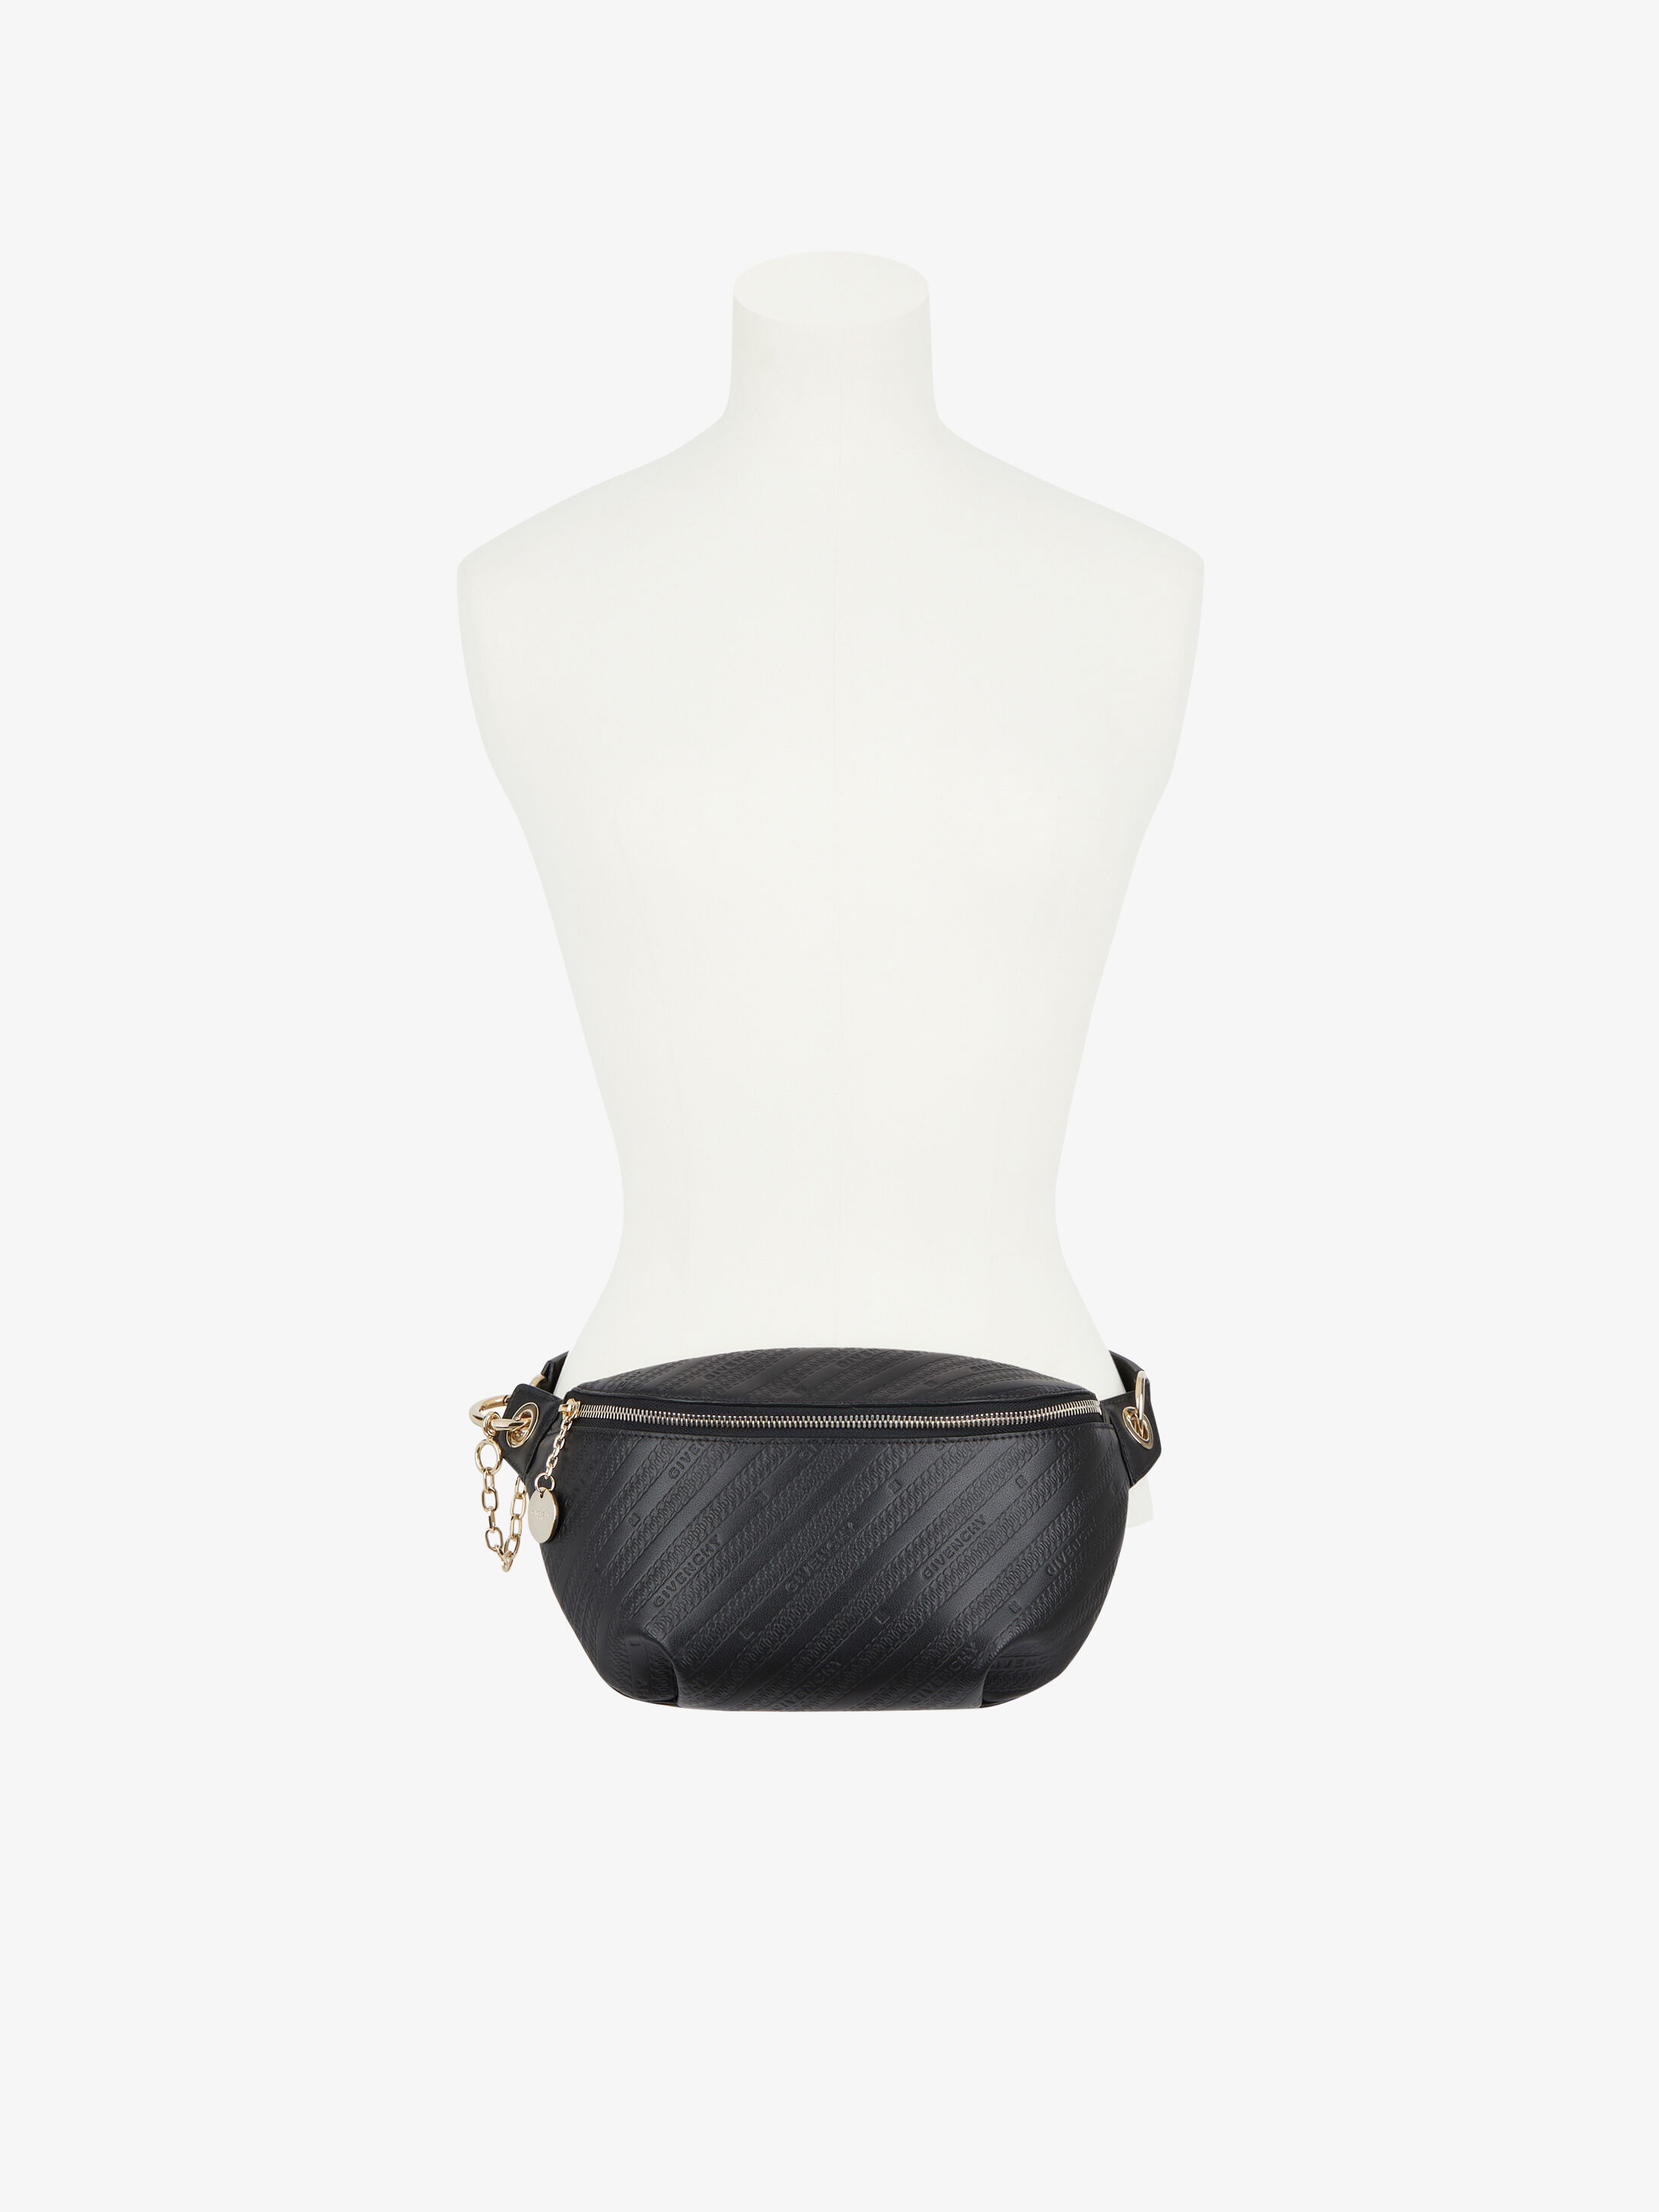 BOND bum bag in GIVENCHY chain embossed leather - 8